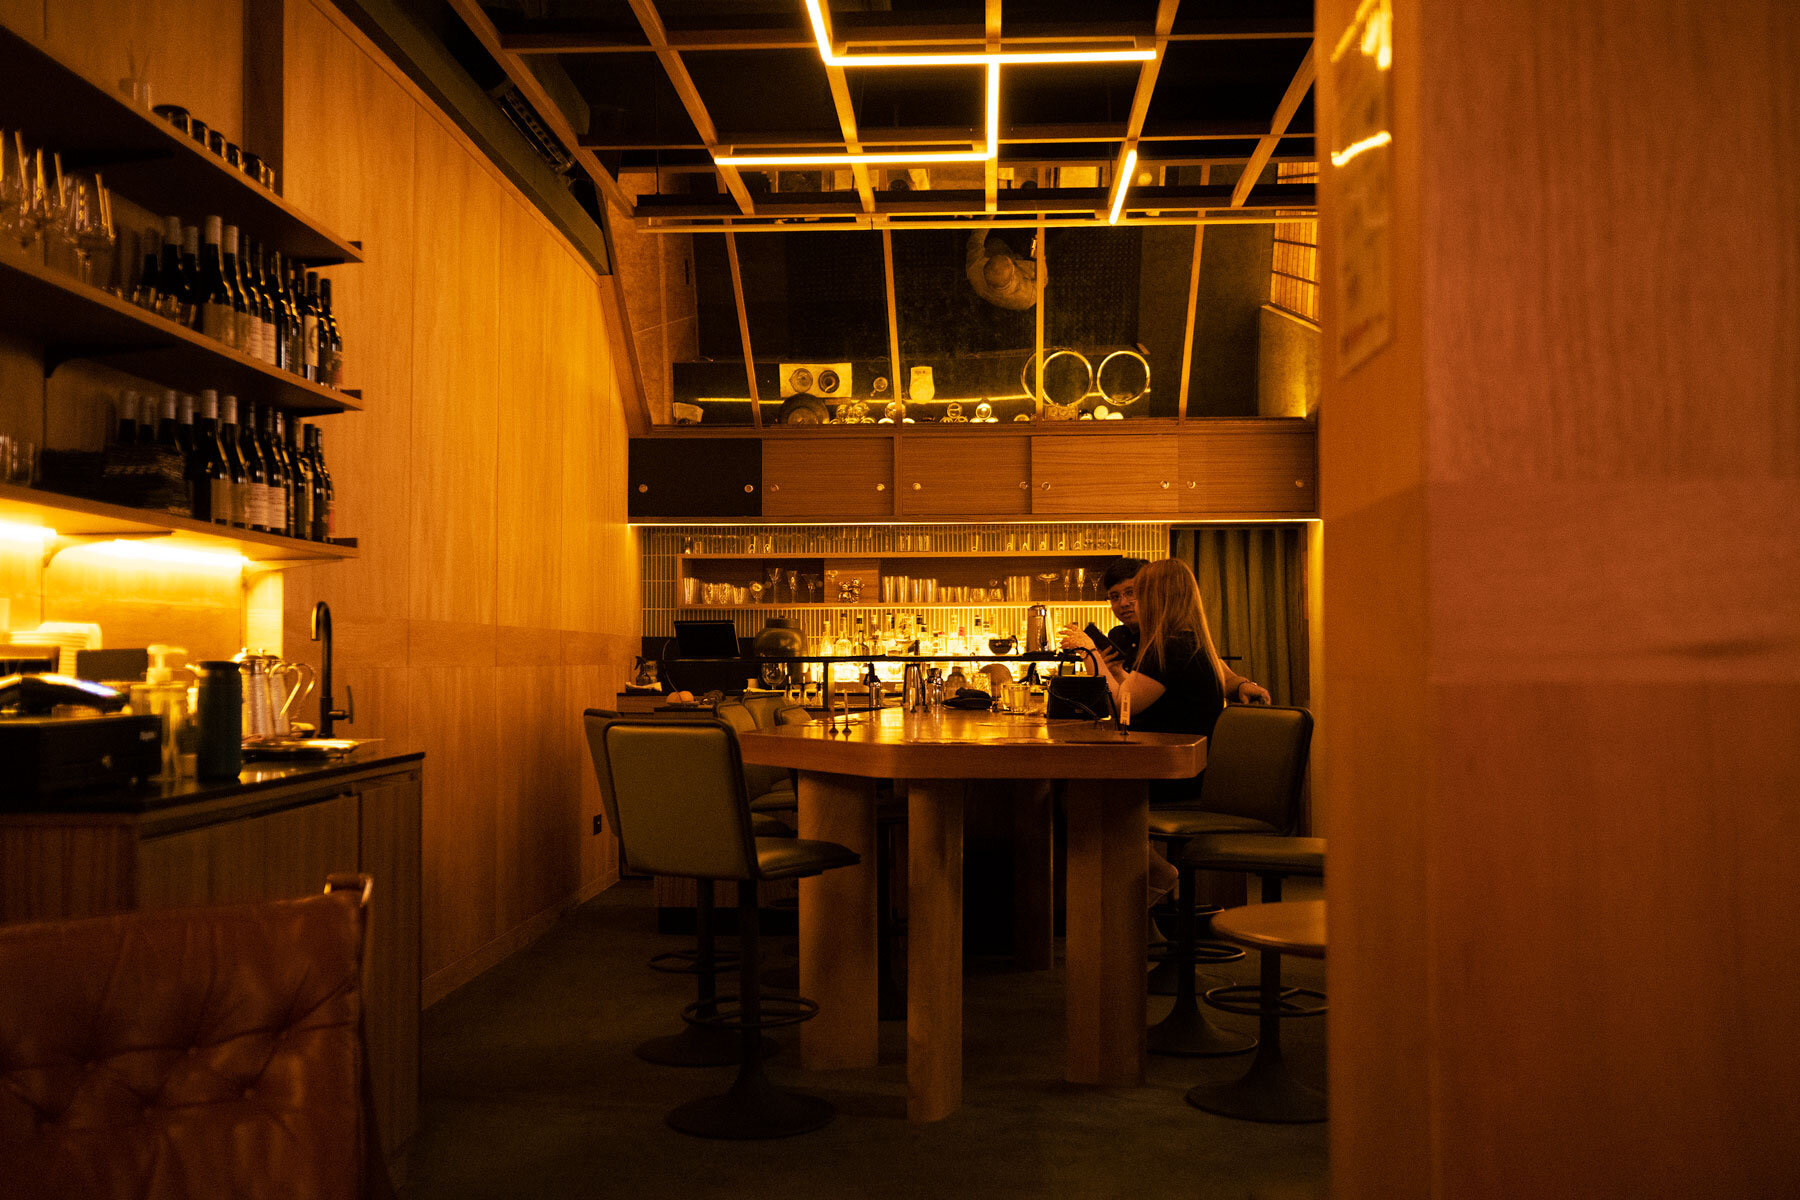 Live Twice welcomes guests to an intimate, cinematic cocktail bar inspired by Japan's mid-century modern era